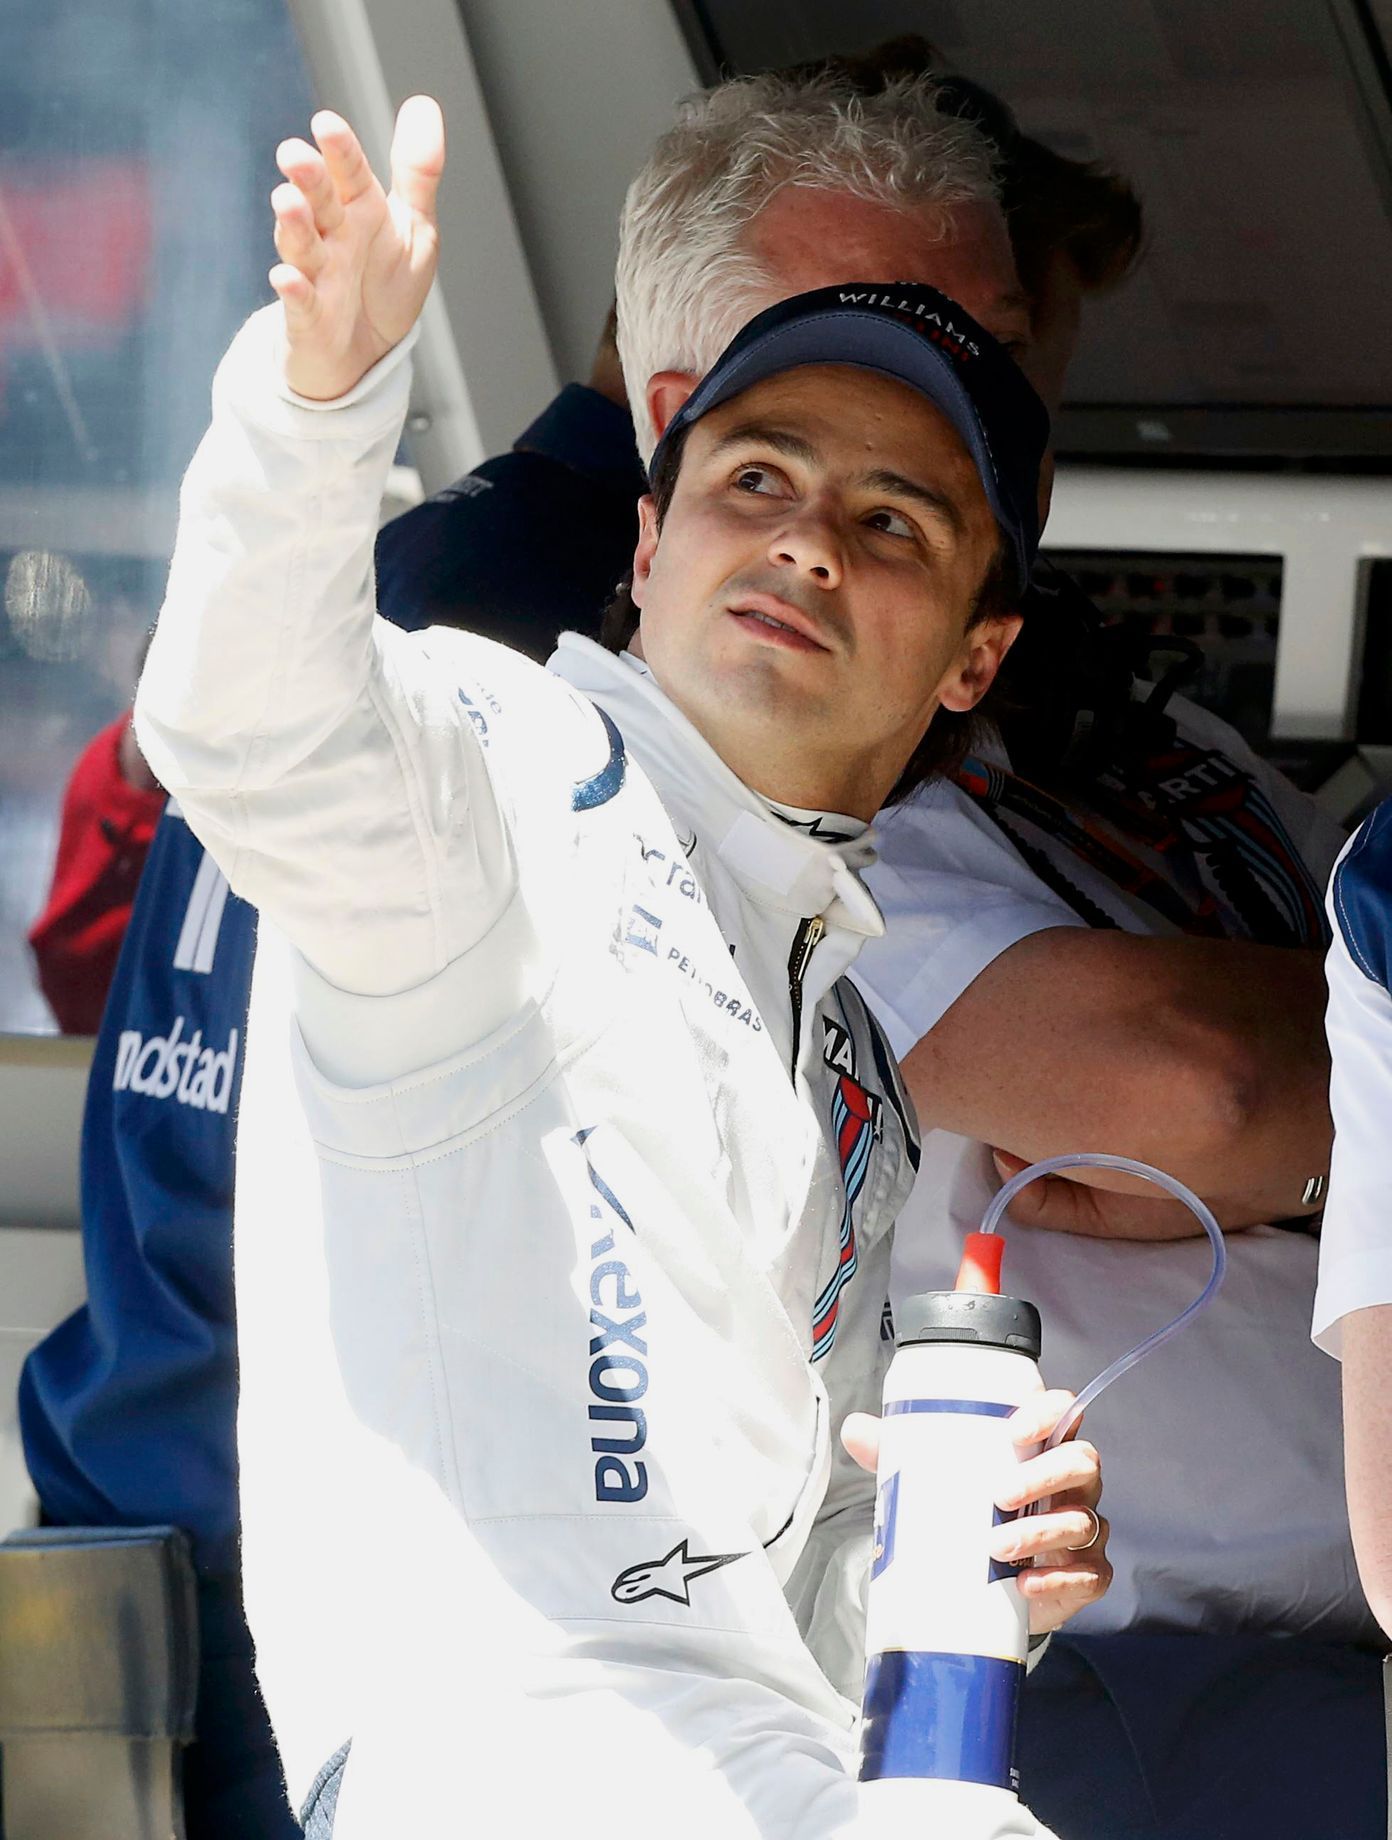 Williams Formula One driver Felipe Massa of Brazil speaks to his crew on the pit wall during the first practice session of the Australian F1 Grand Prix at the Albert Park circuit in Melbourne